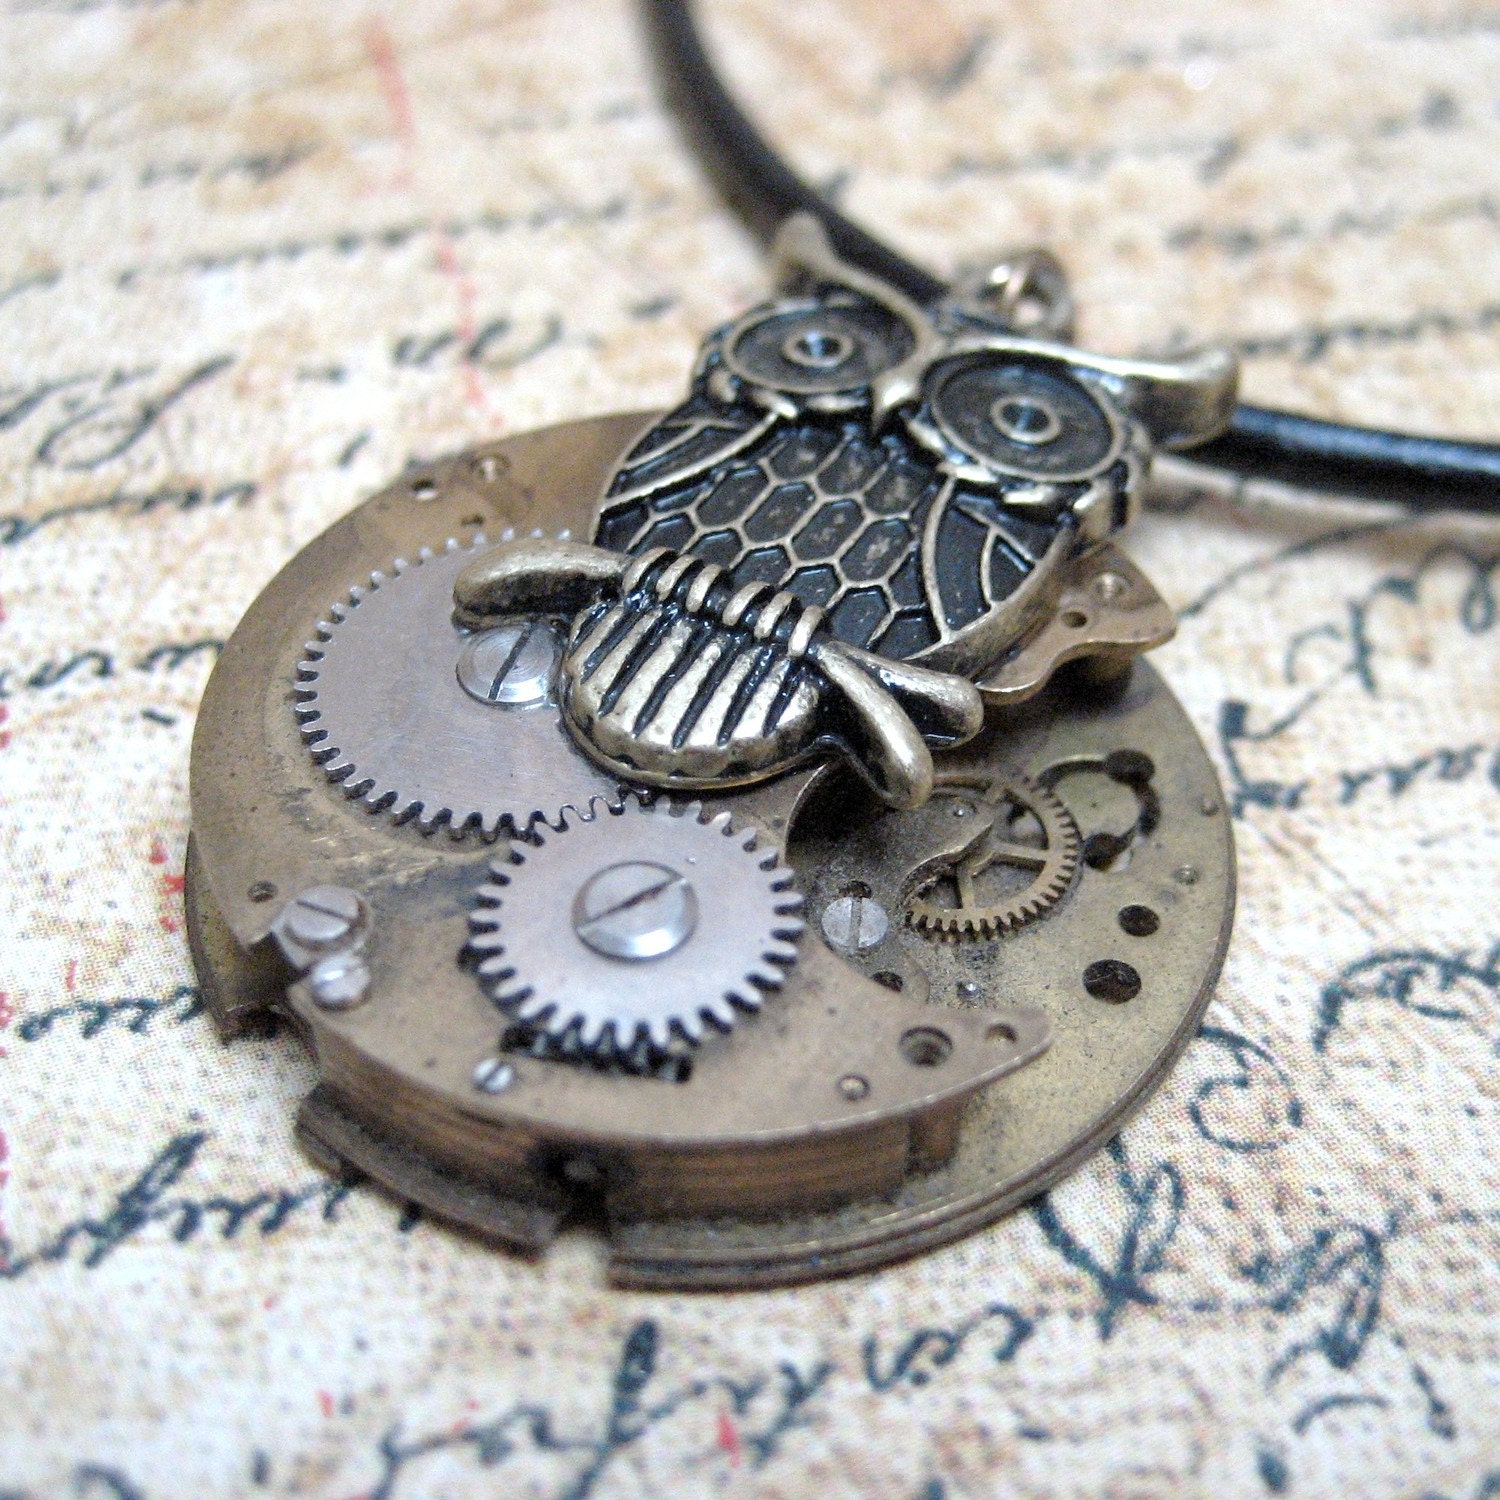 Unisex Steampunk Necklace - Time Wise - Antiqued Gold - Neo Victorian Inspired Vintage Repurposed Watch Movement Jewellery - Handmade and Designed by A Second Time